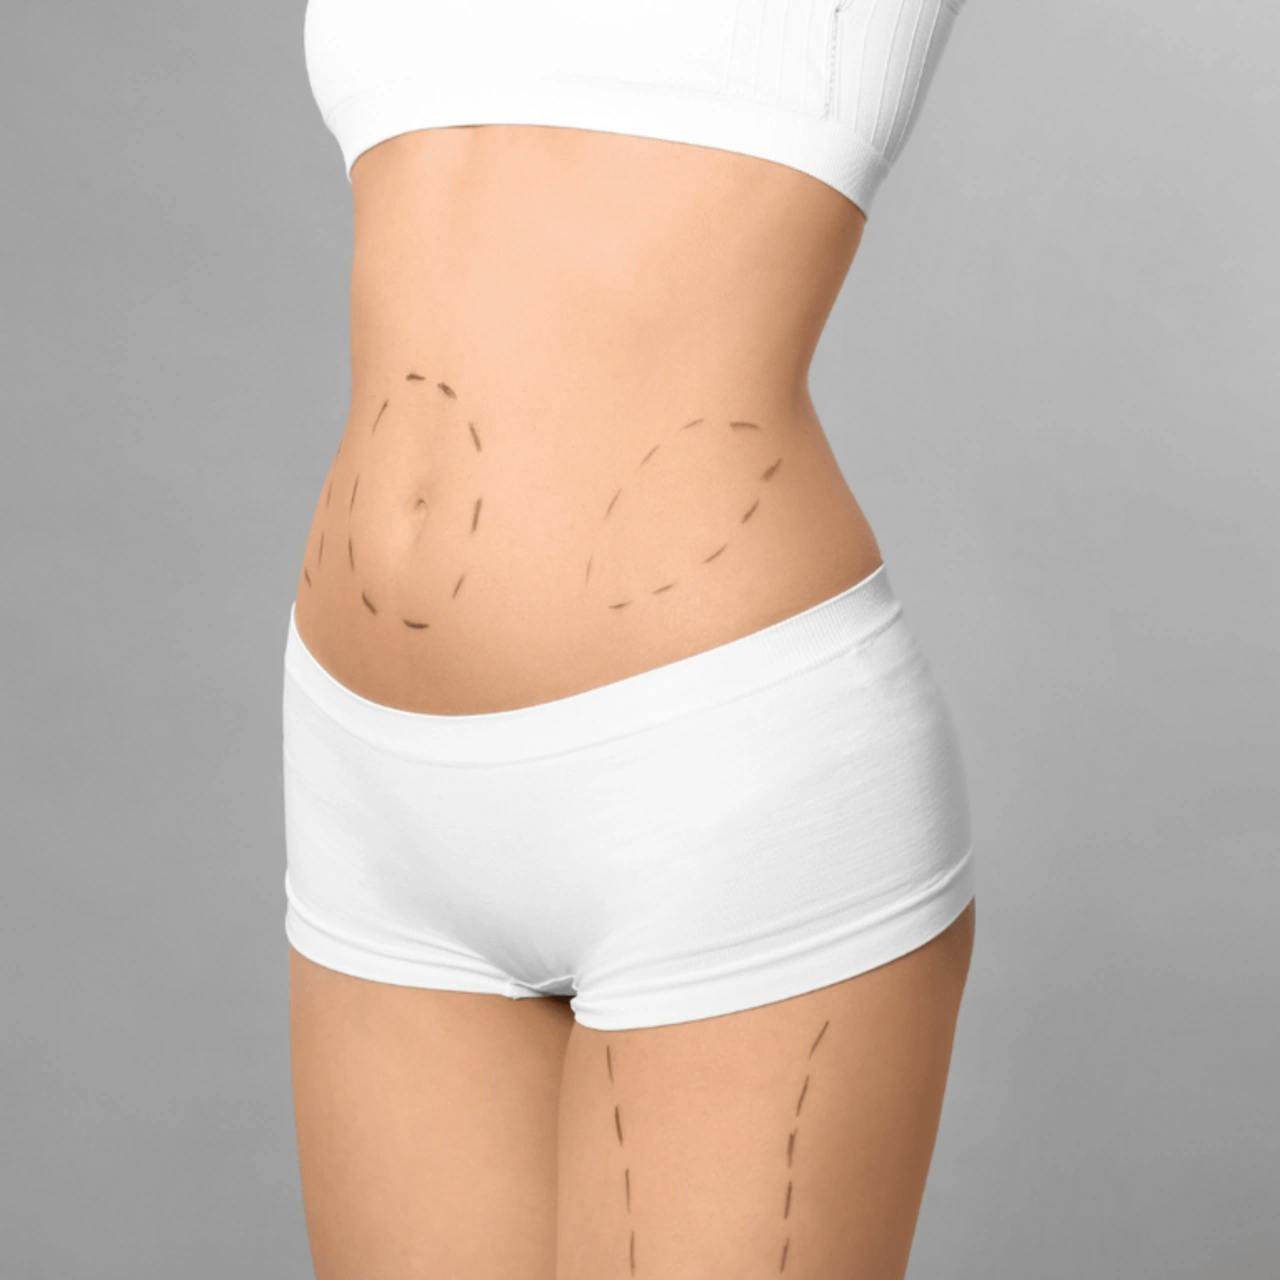 What is a Tummy Tuck?